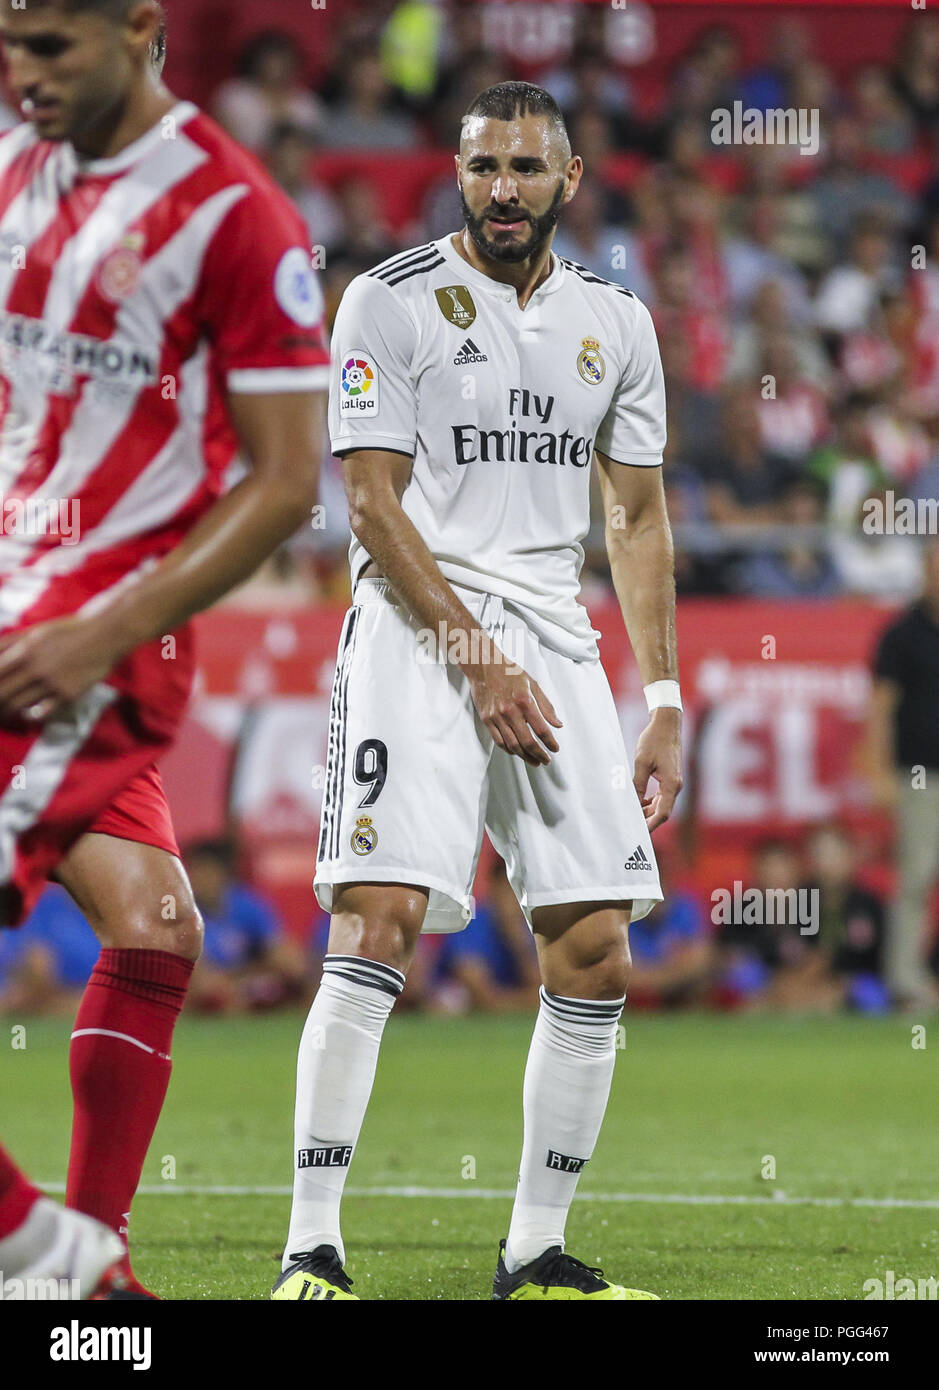 Girona, Spain. 26th Aug, 2018. Benzema of Real Madrid in action during the spanish league, La Liga, football match between Girona and Real Madrid CF on August 26, 2018 at Montilivi stadium in Girona, Spain. 26th Aug, 2018. Credit: AFP7/ZUMA Wire/Alamy Live News Stock Photo